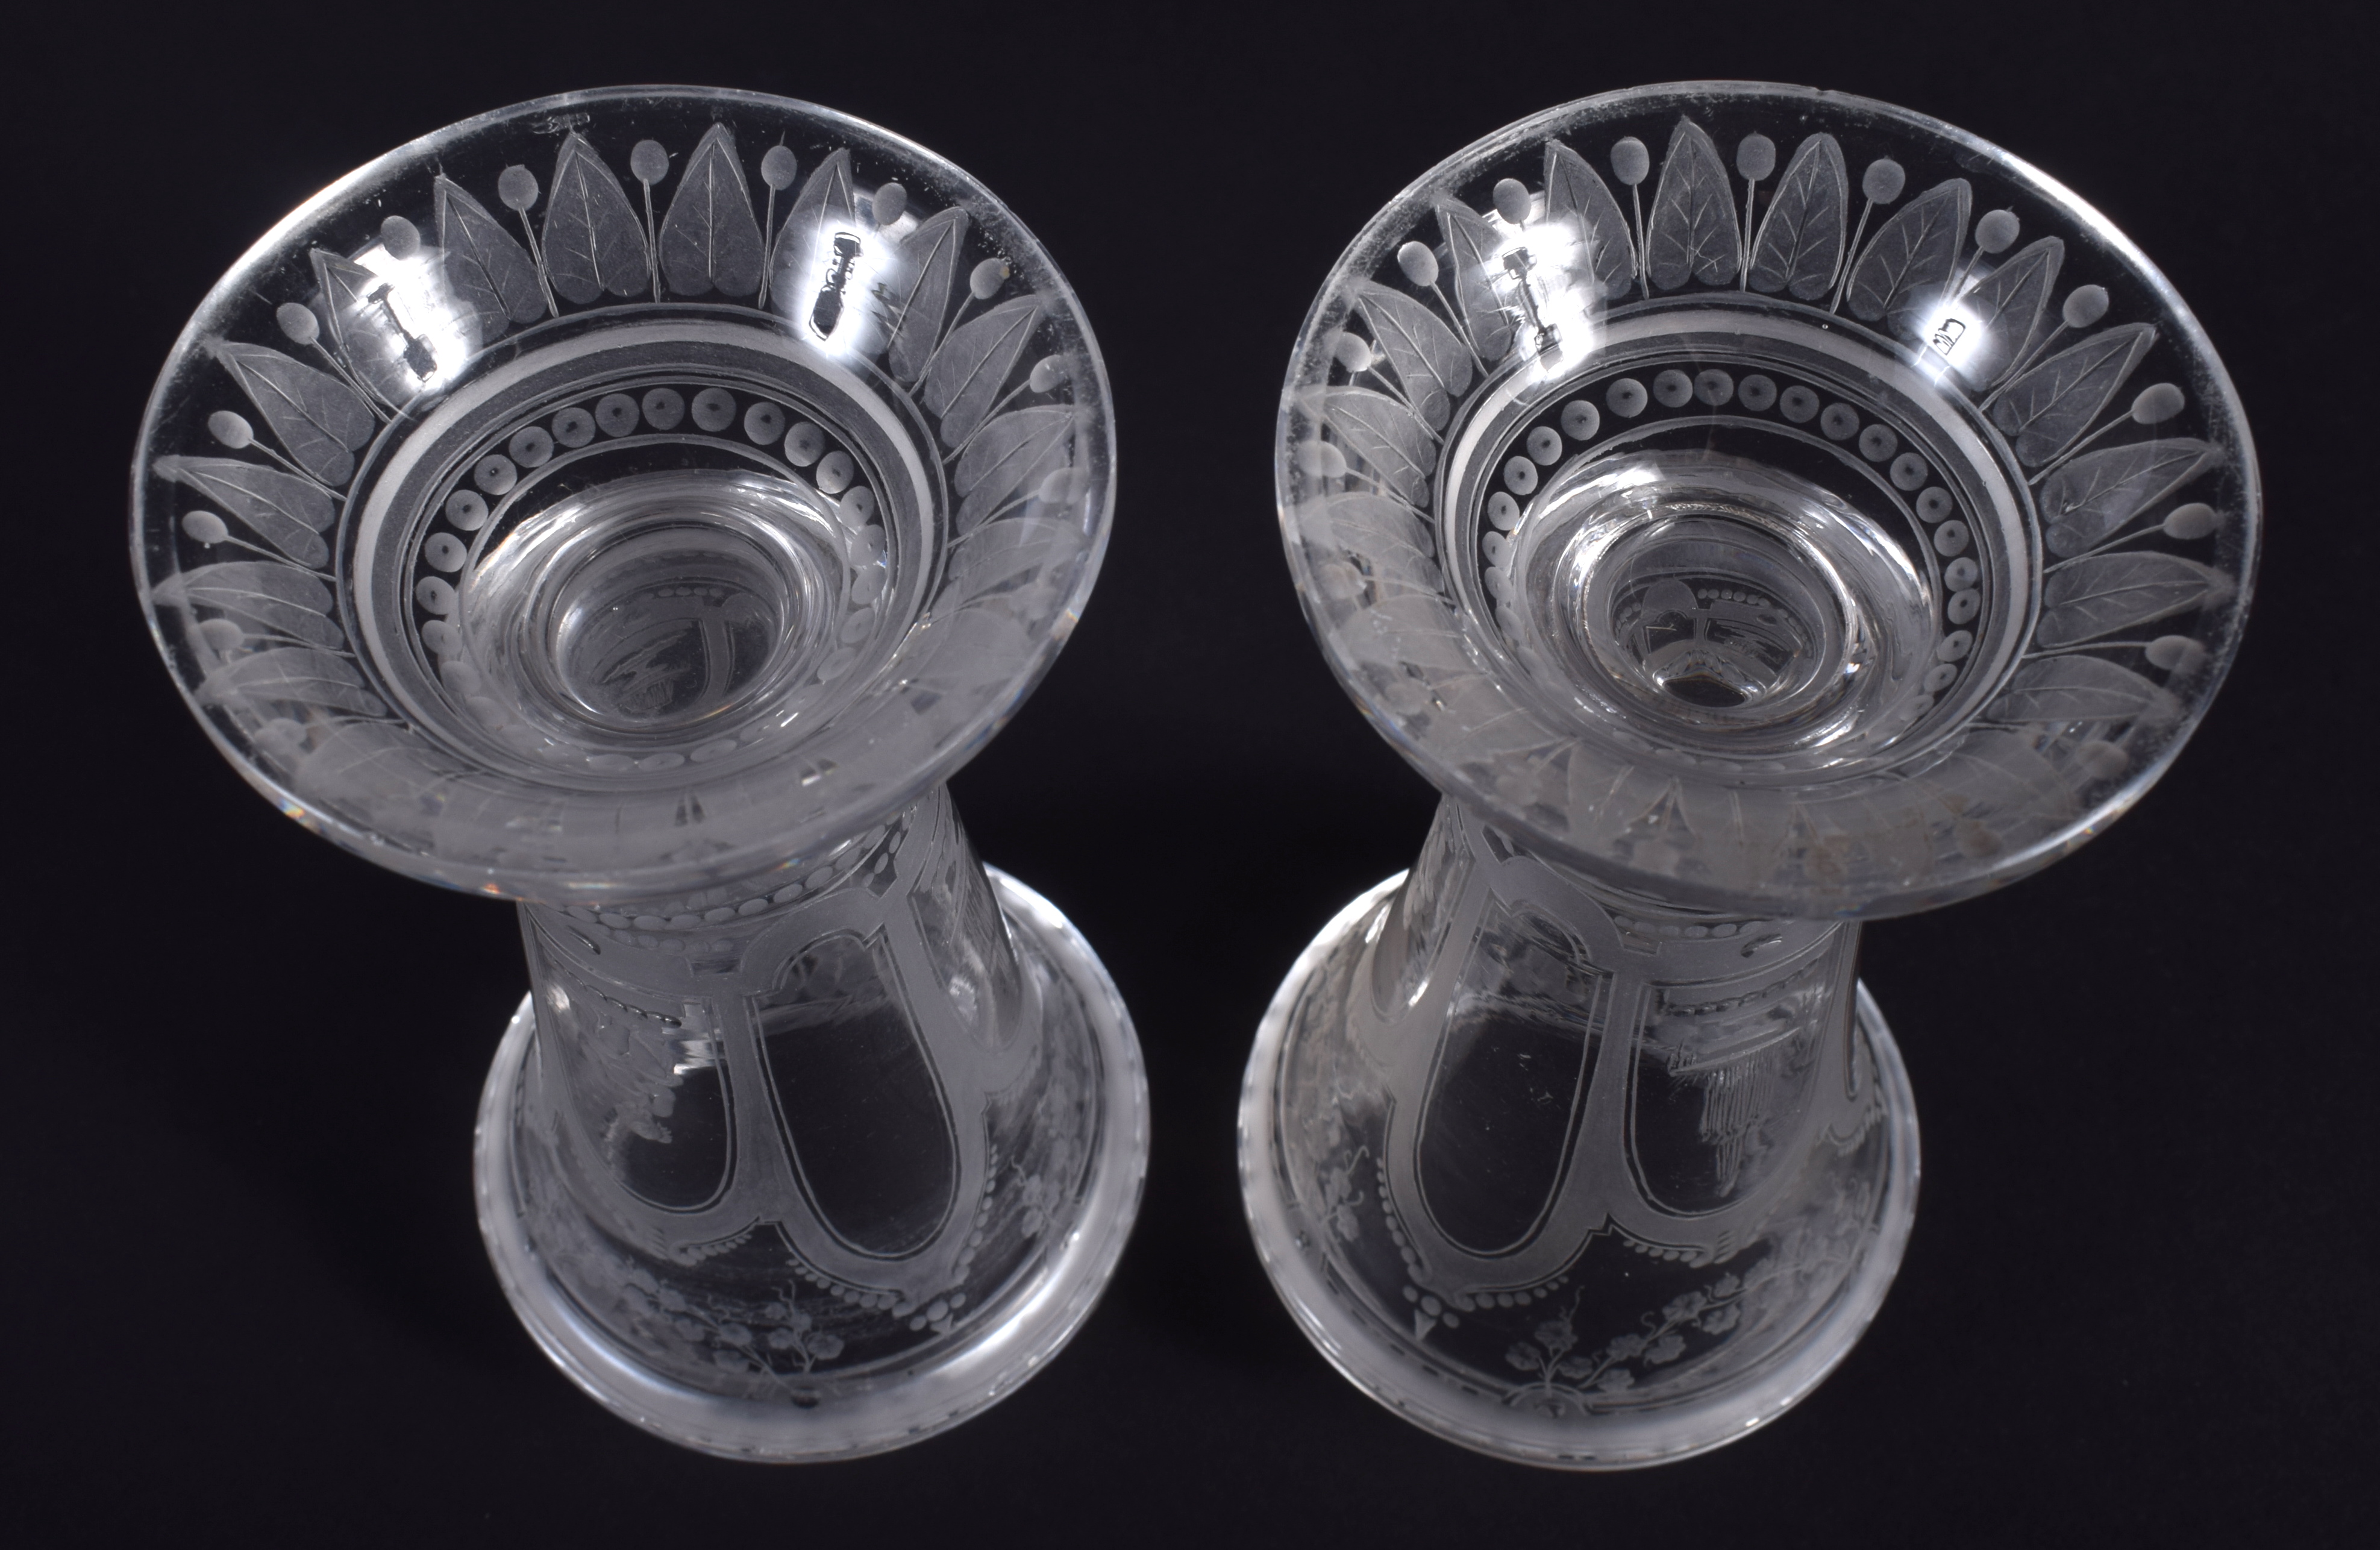 A PAIR OF 19TH CENTURY VENETIAN CLEAR GLASSES etched with figures and buildings. 12.5 cm high. - Image 3 of 3